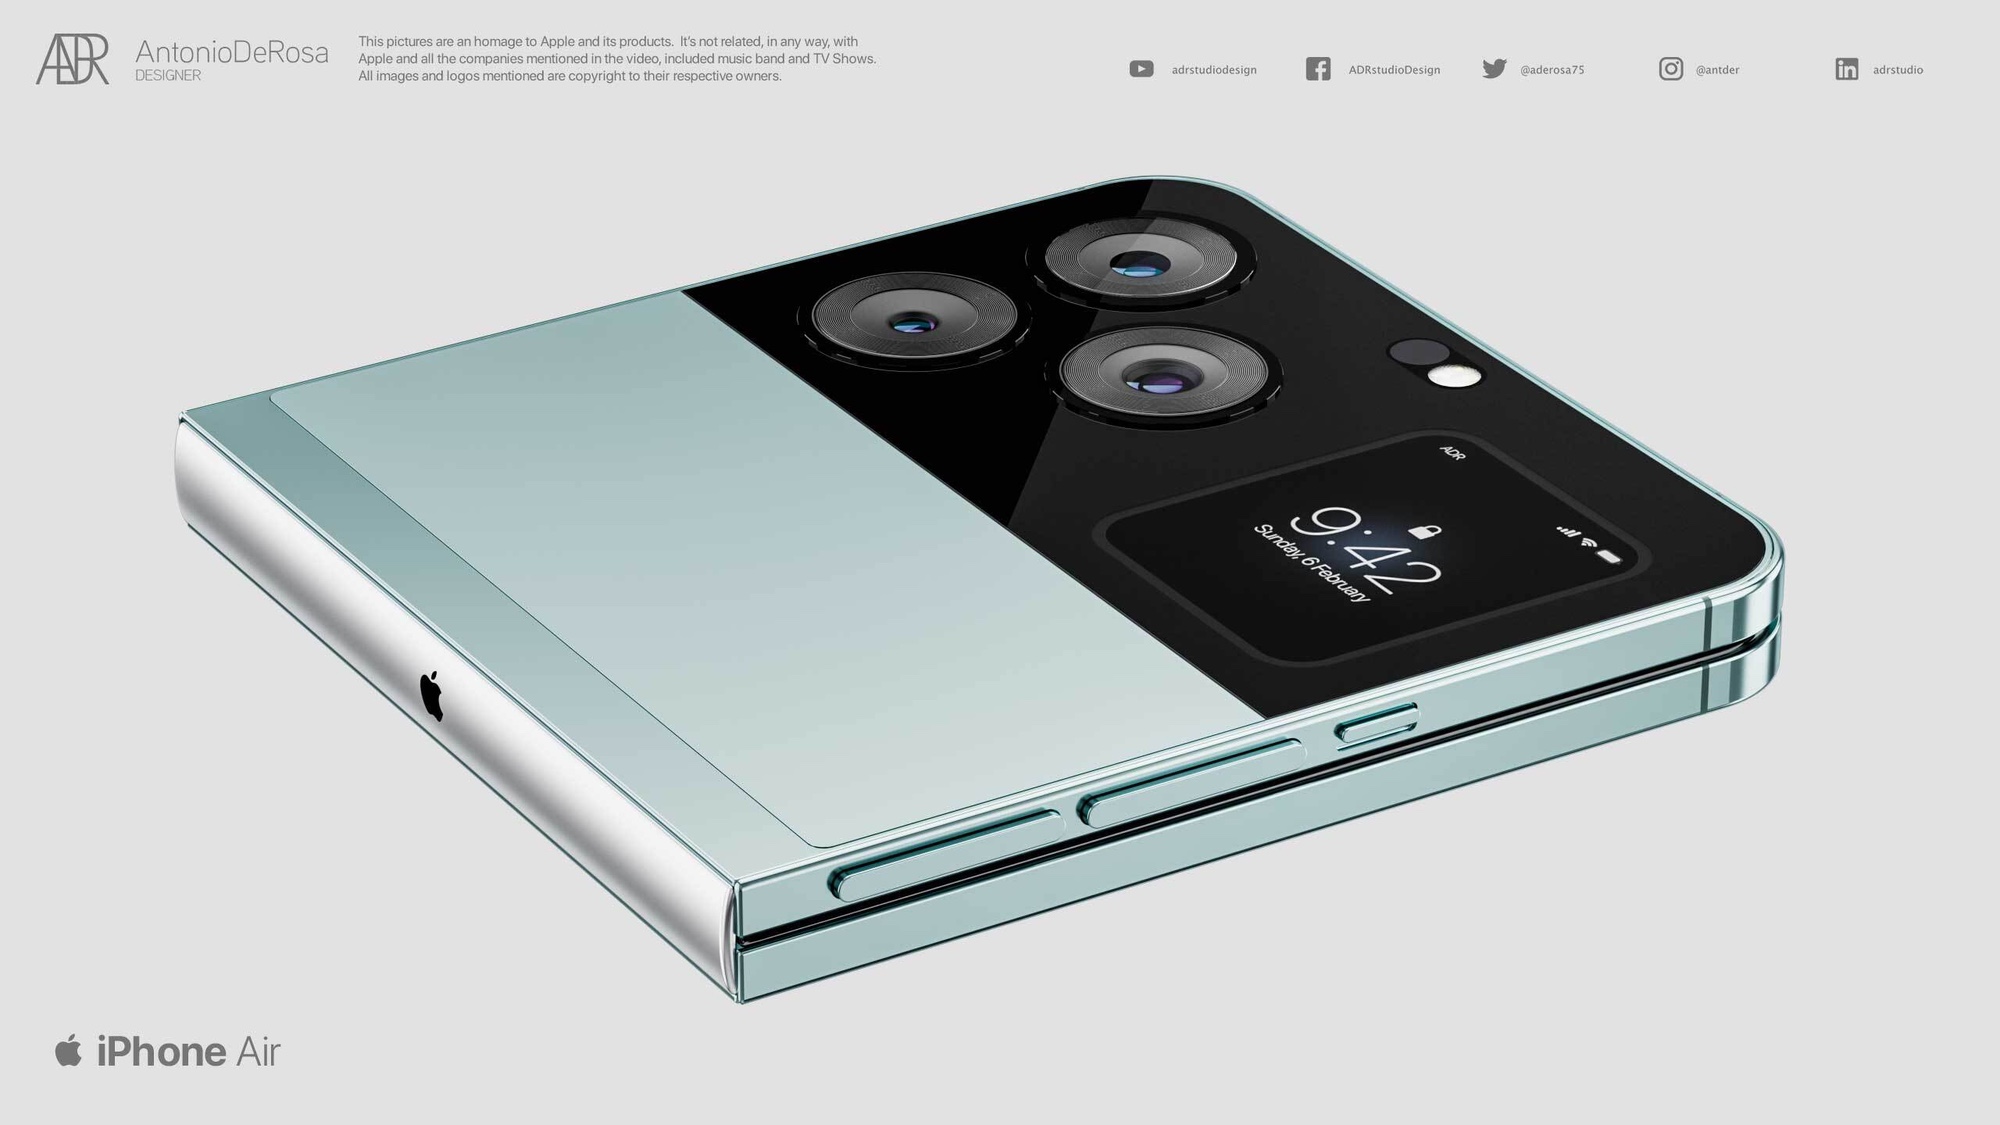 iPhone Air is an iPhone Flip concept phone